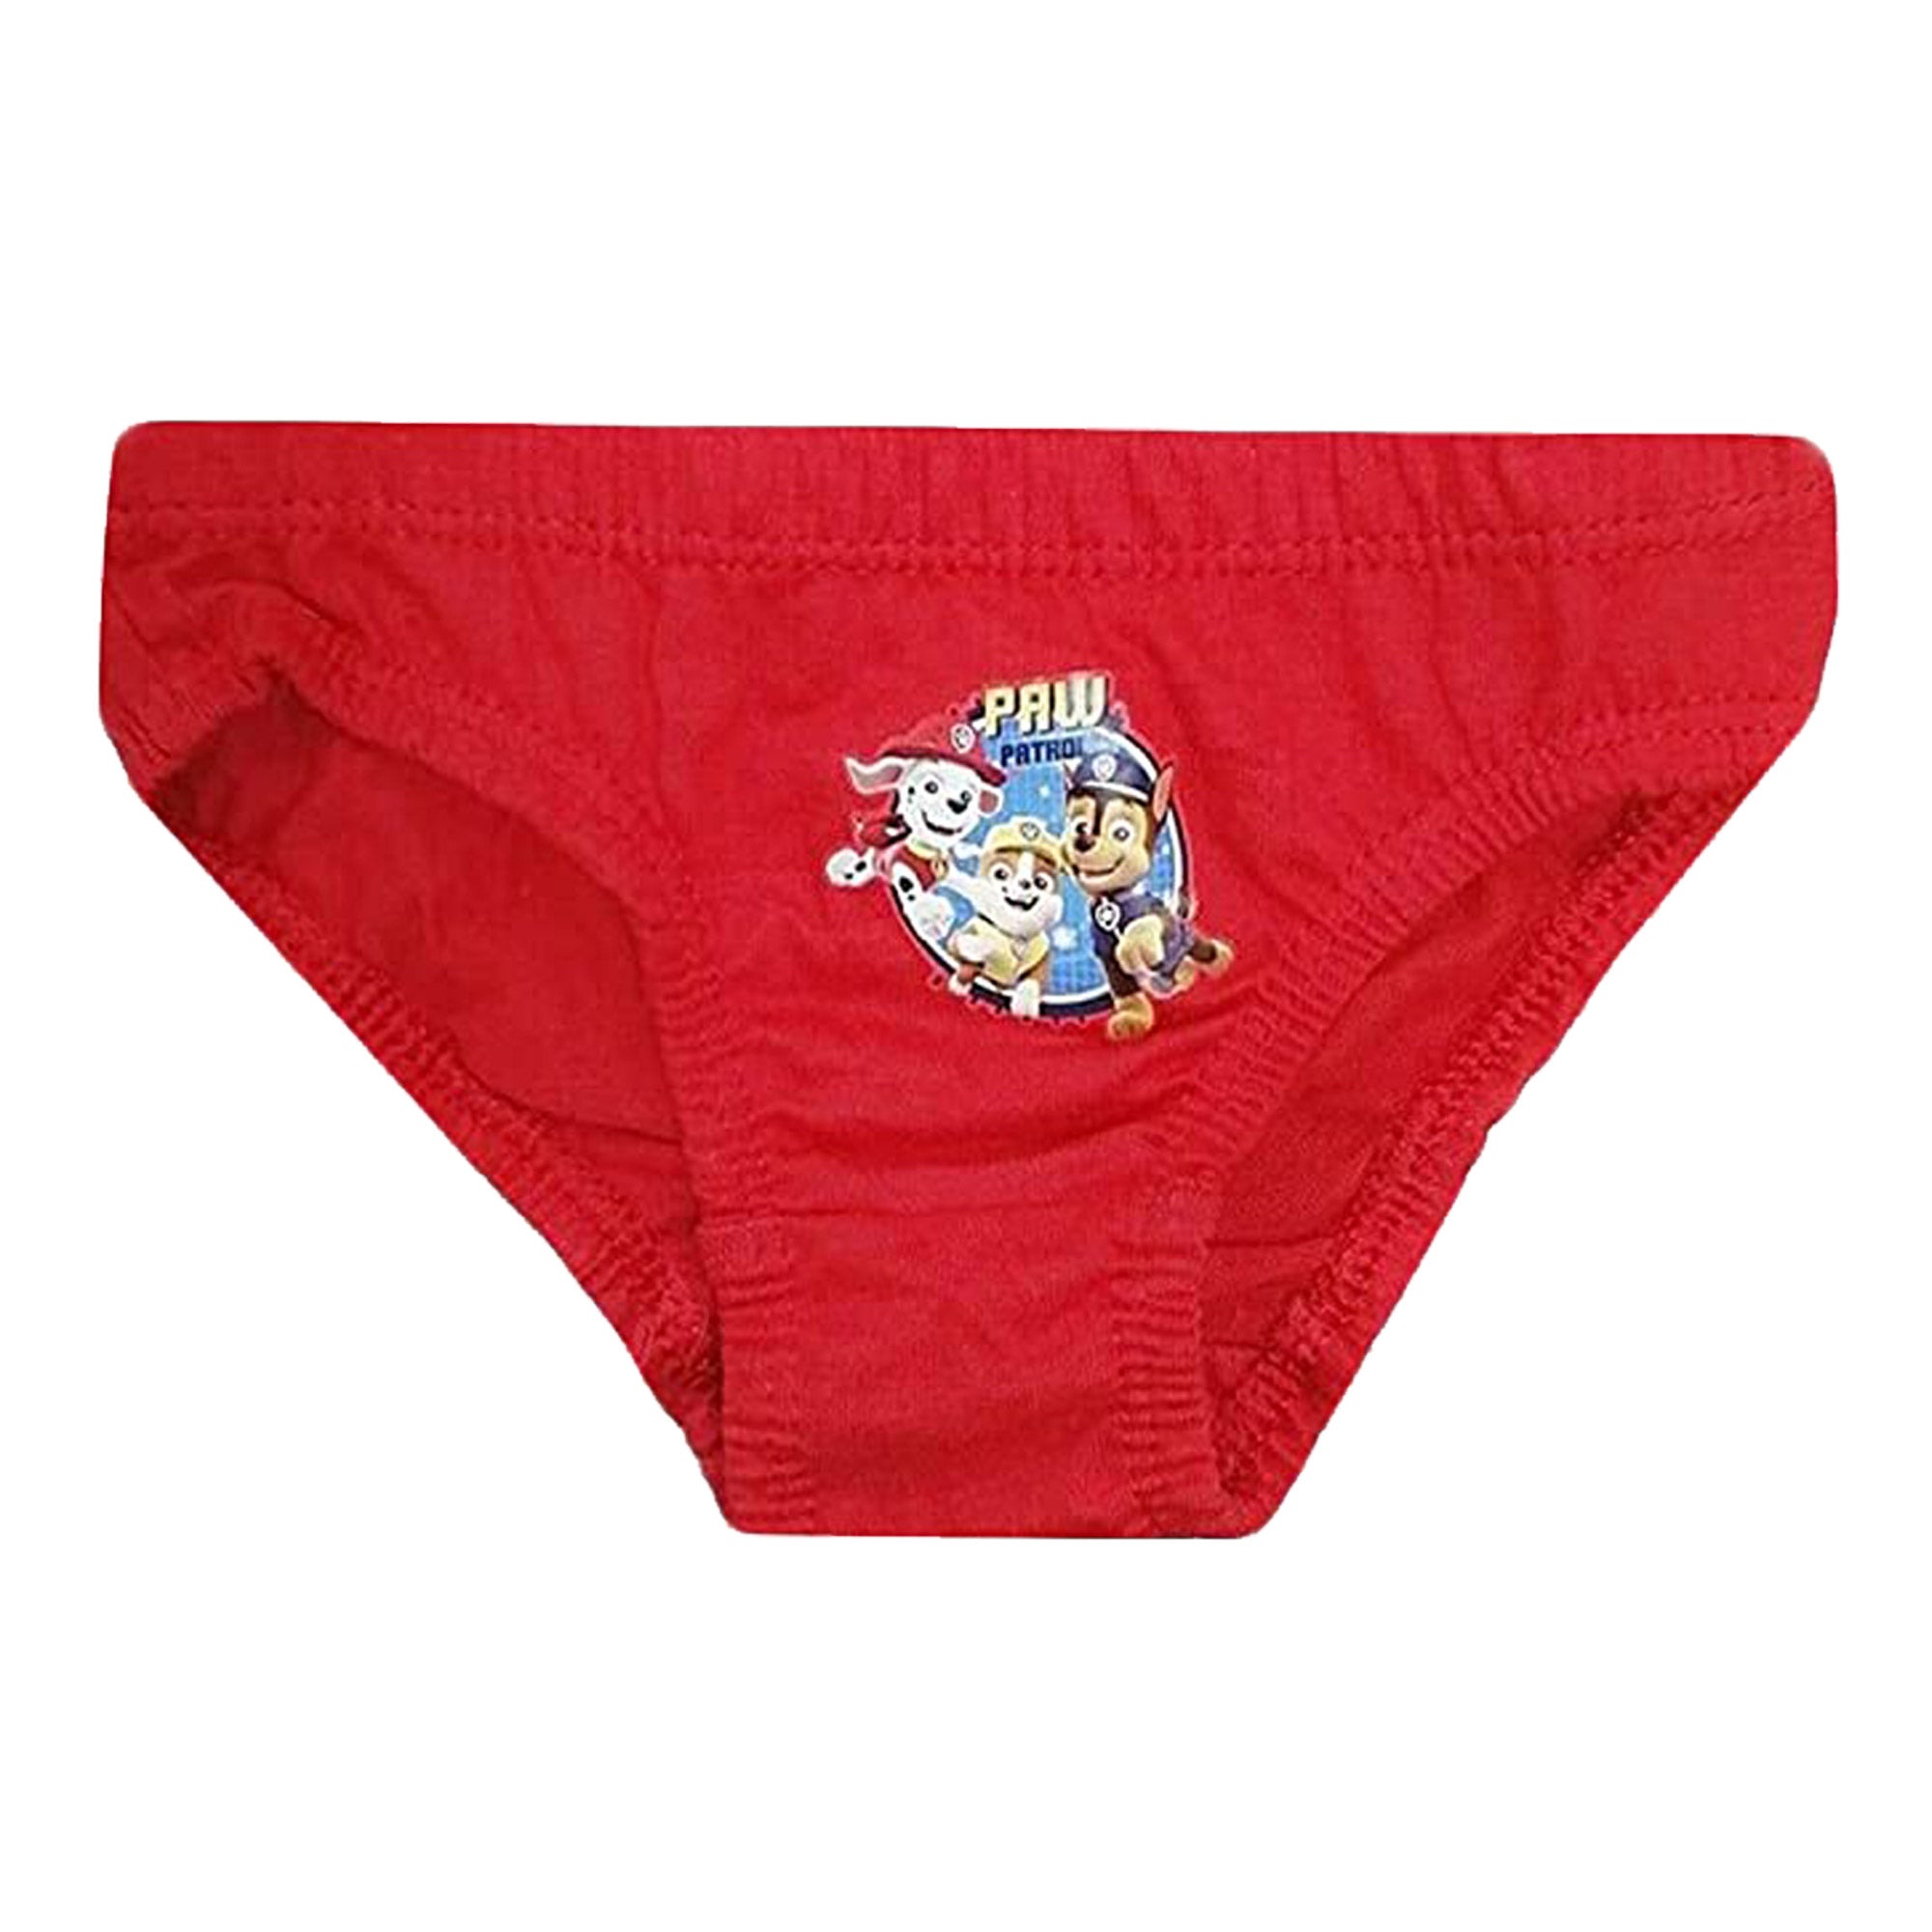 Paw Patrol Kids Underwear Briefs Pants Blue 3 Pack Sizes 18 months to 5 Years red detail